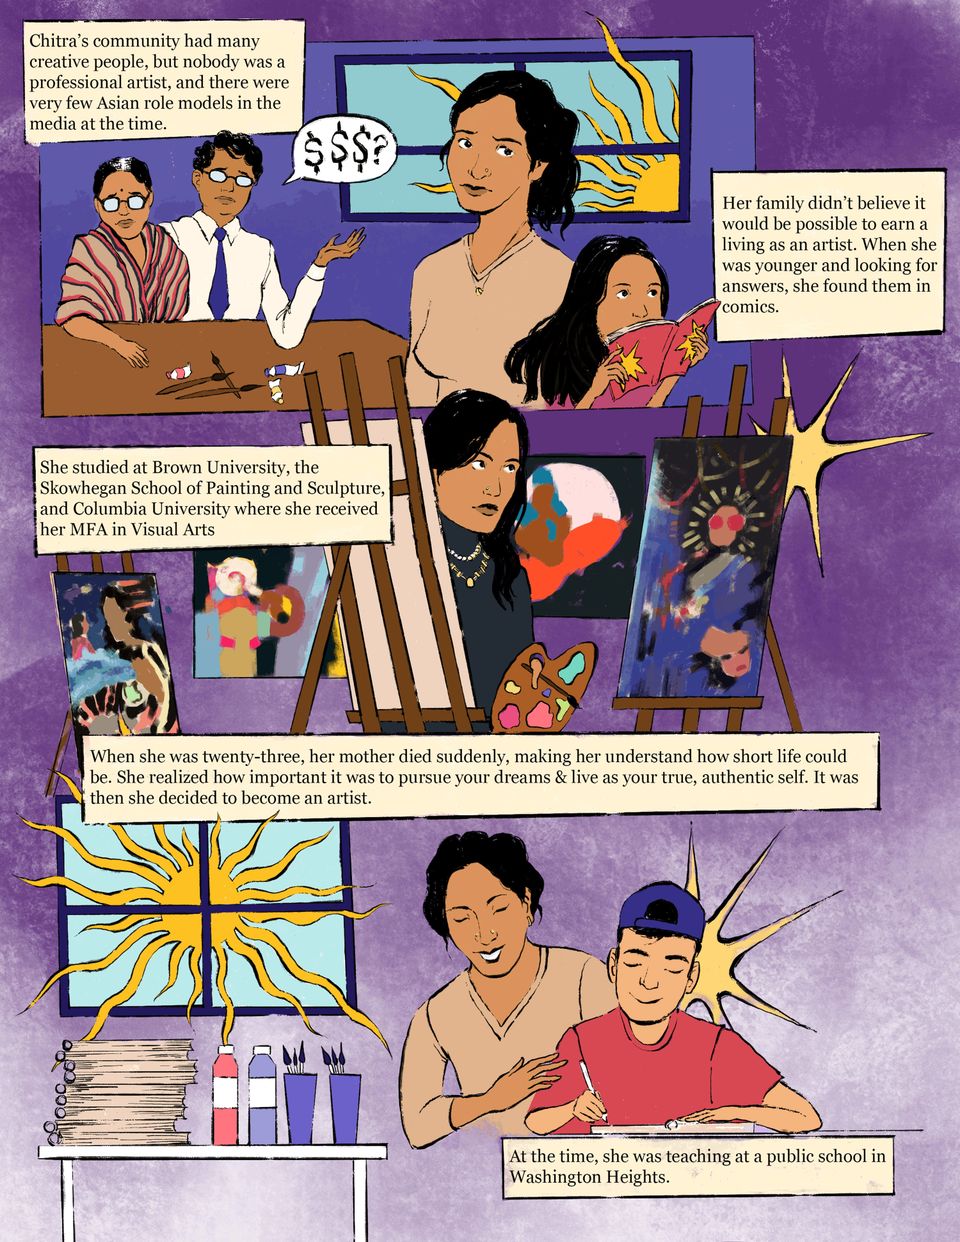 Illustration of Chitra becoming an artist and then a teacher, despite disapproval. Set on a purple backdrop with descriptive text.